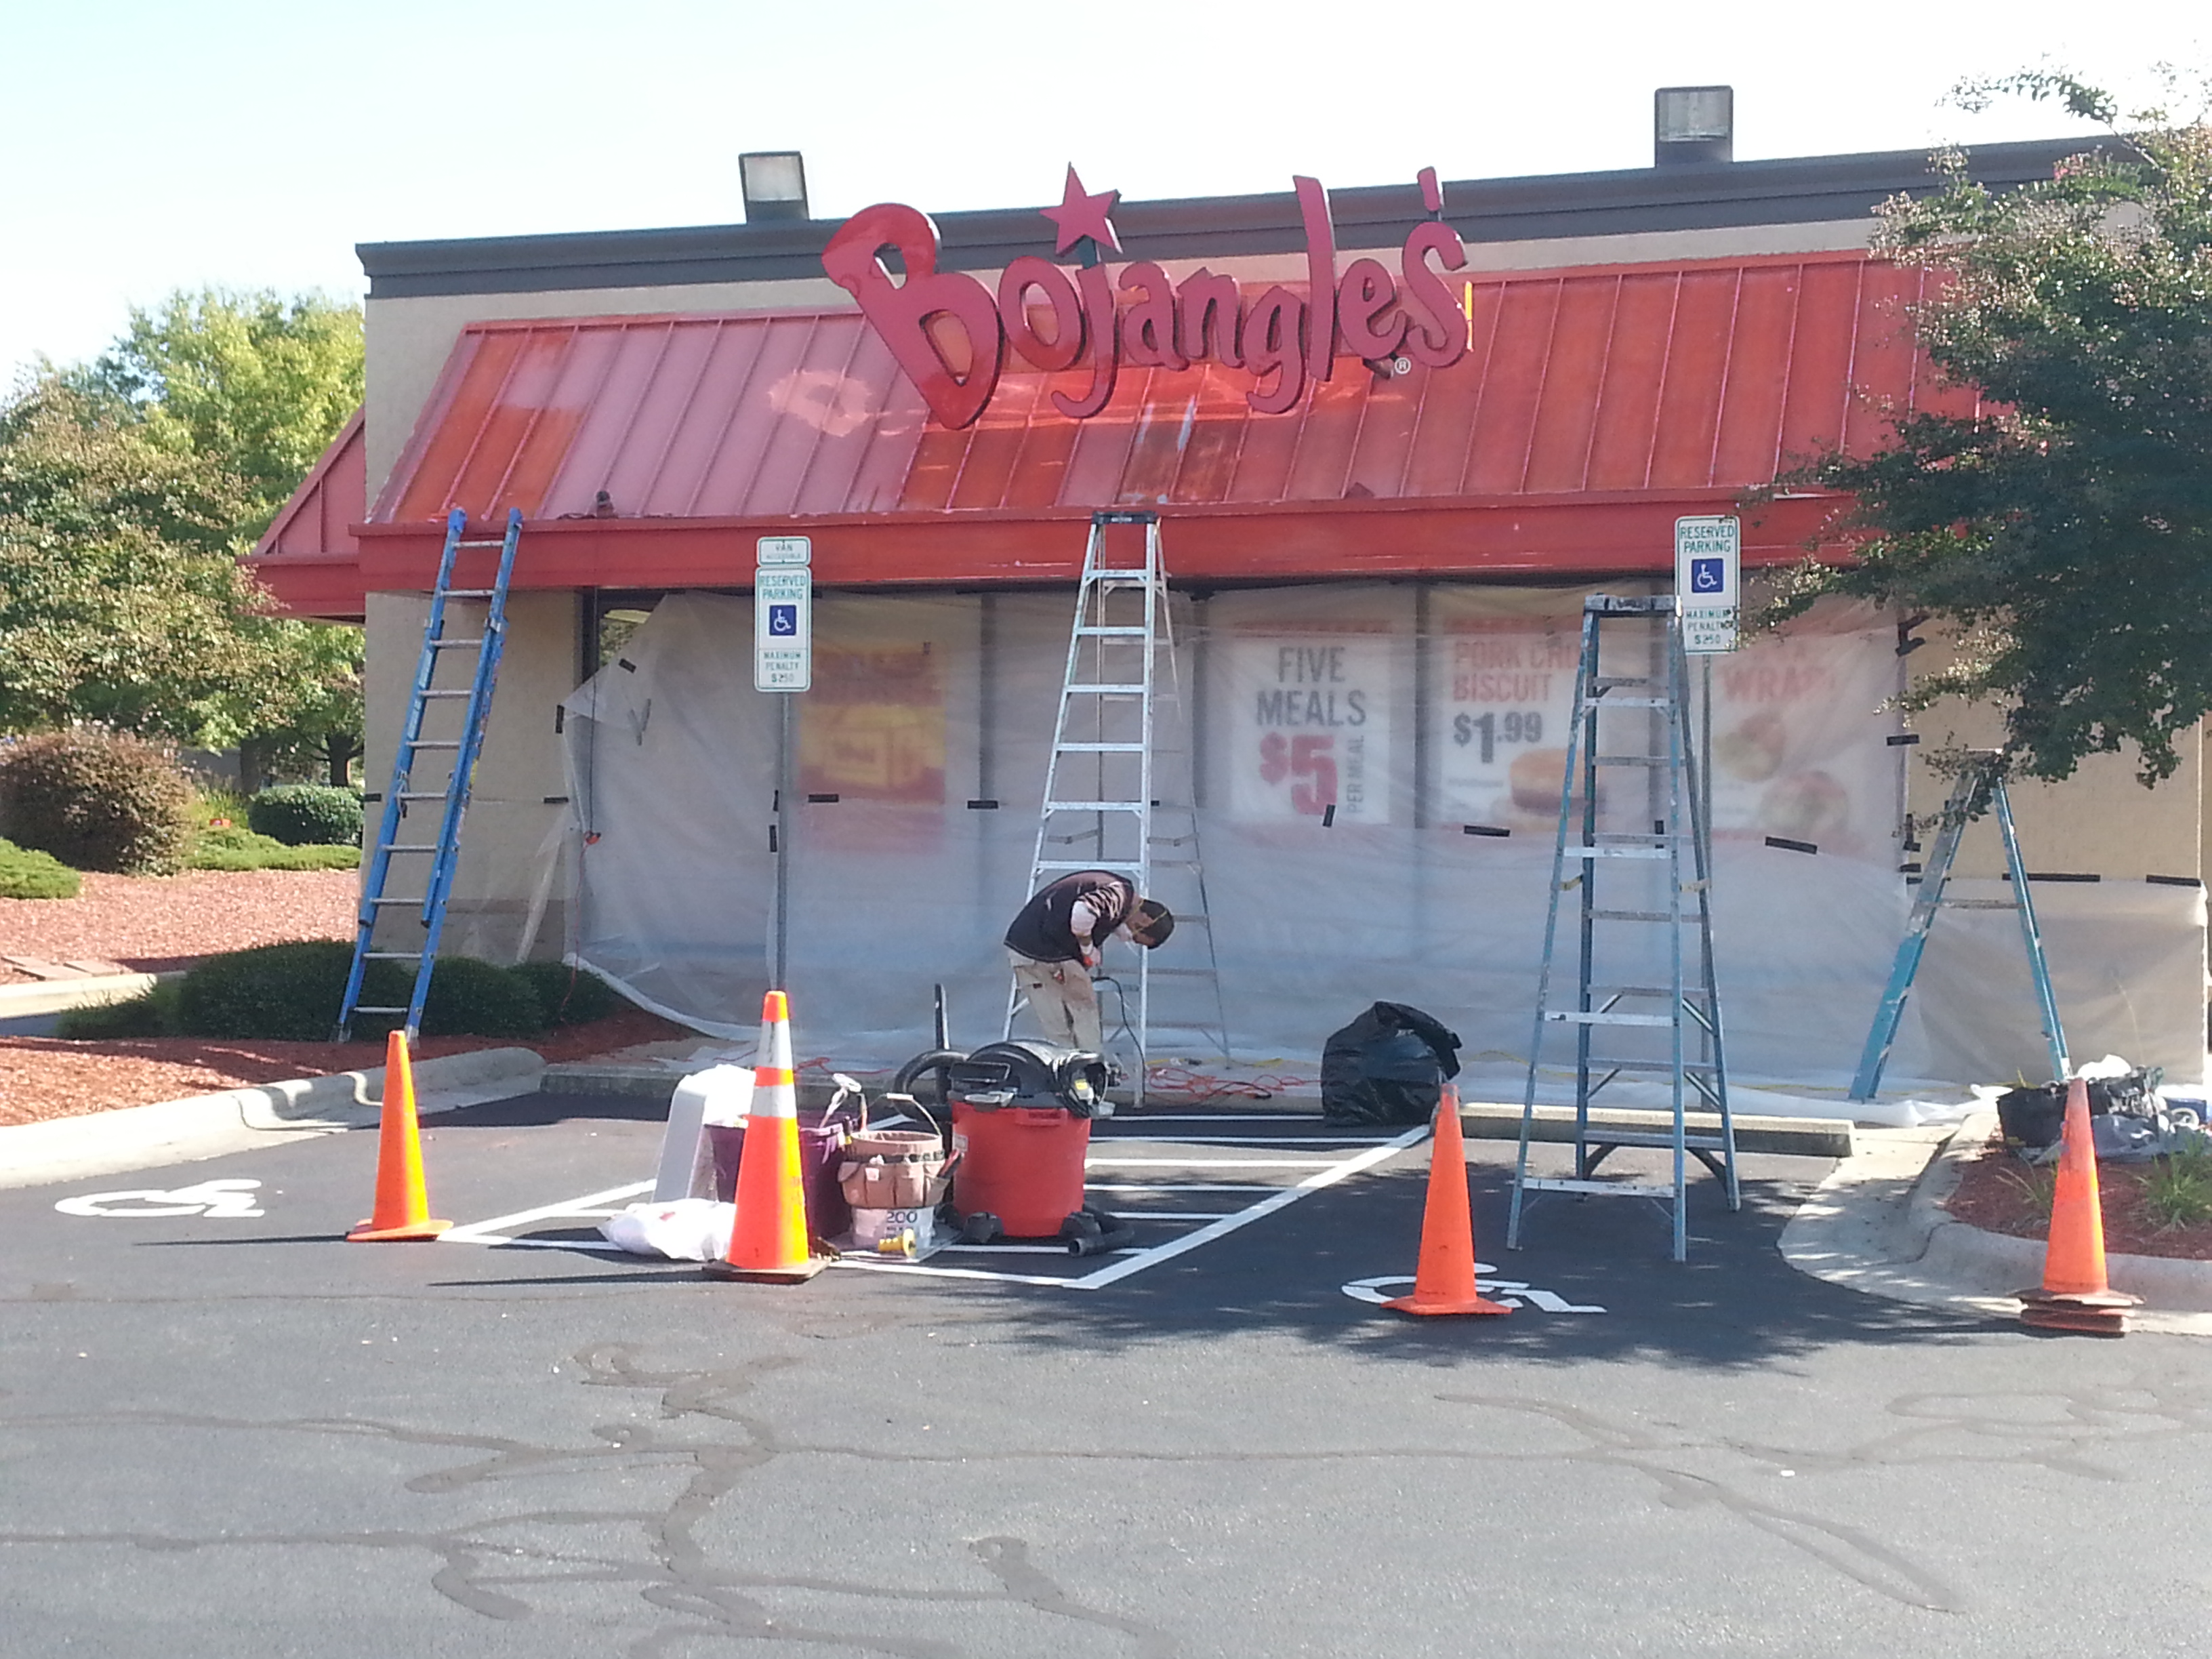 Commercial renovation project at Bojangles